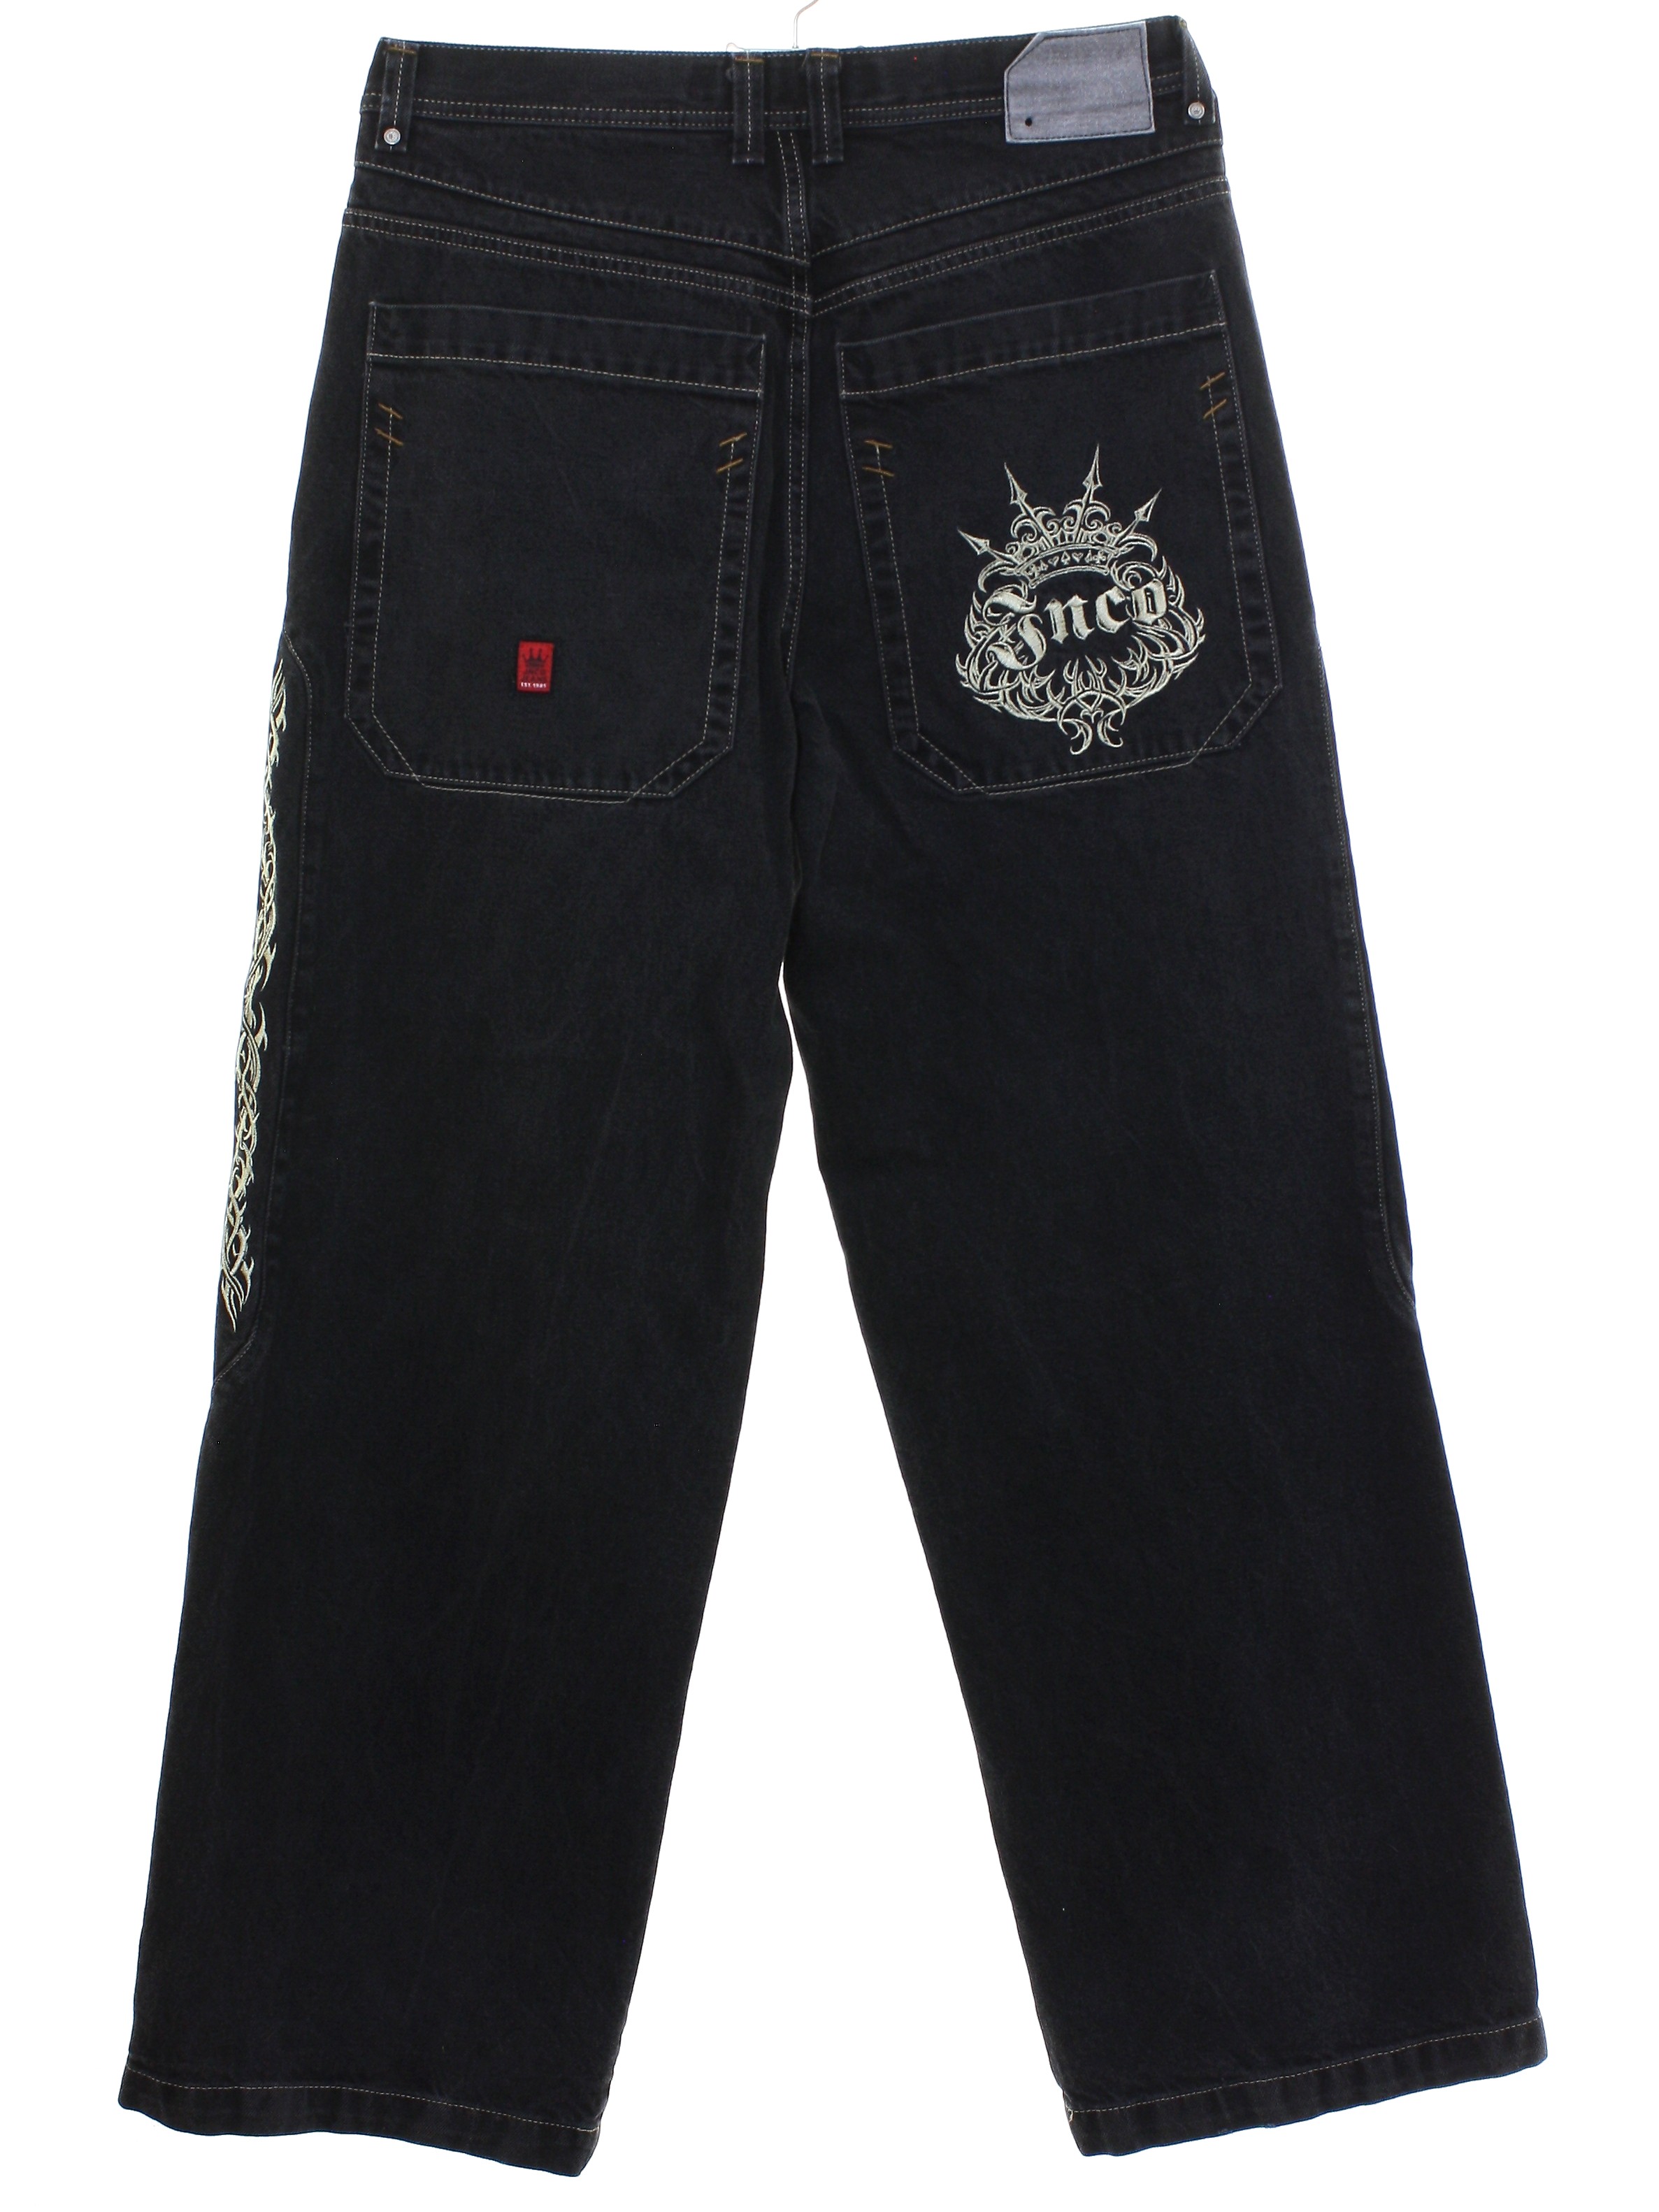 forstyrrelse I hele verden mundstykke Retro Nineties Pants: 90s -Jnco Jeans- Mens slightly faded black cotton denim  denim jeans pants with button fly closure. Five pocket style - front scoop  pockets with single coin pocket and two